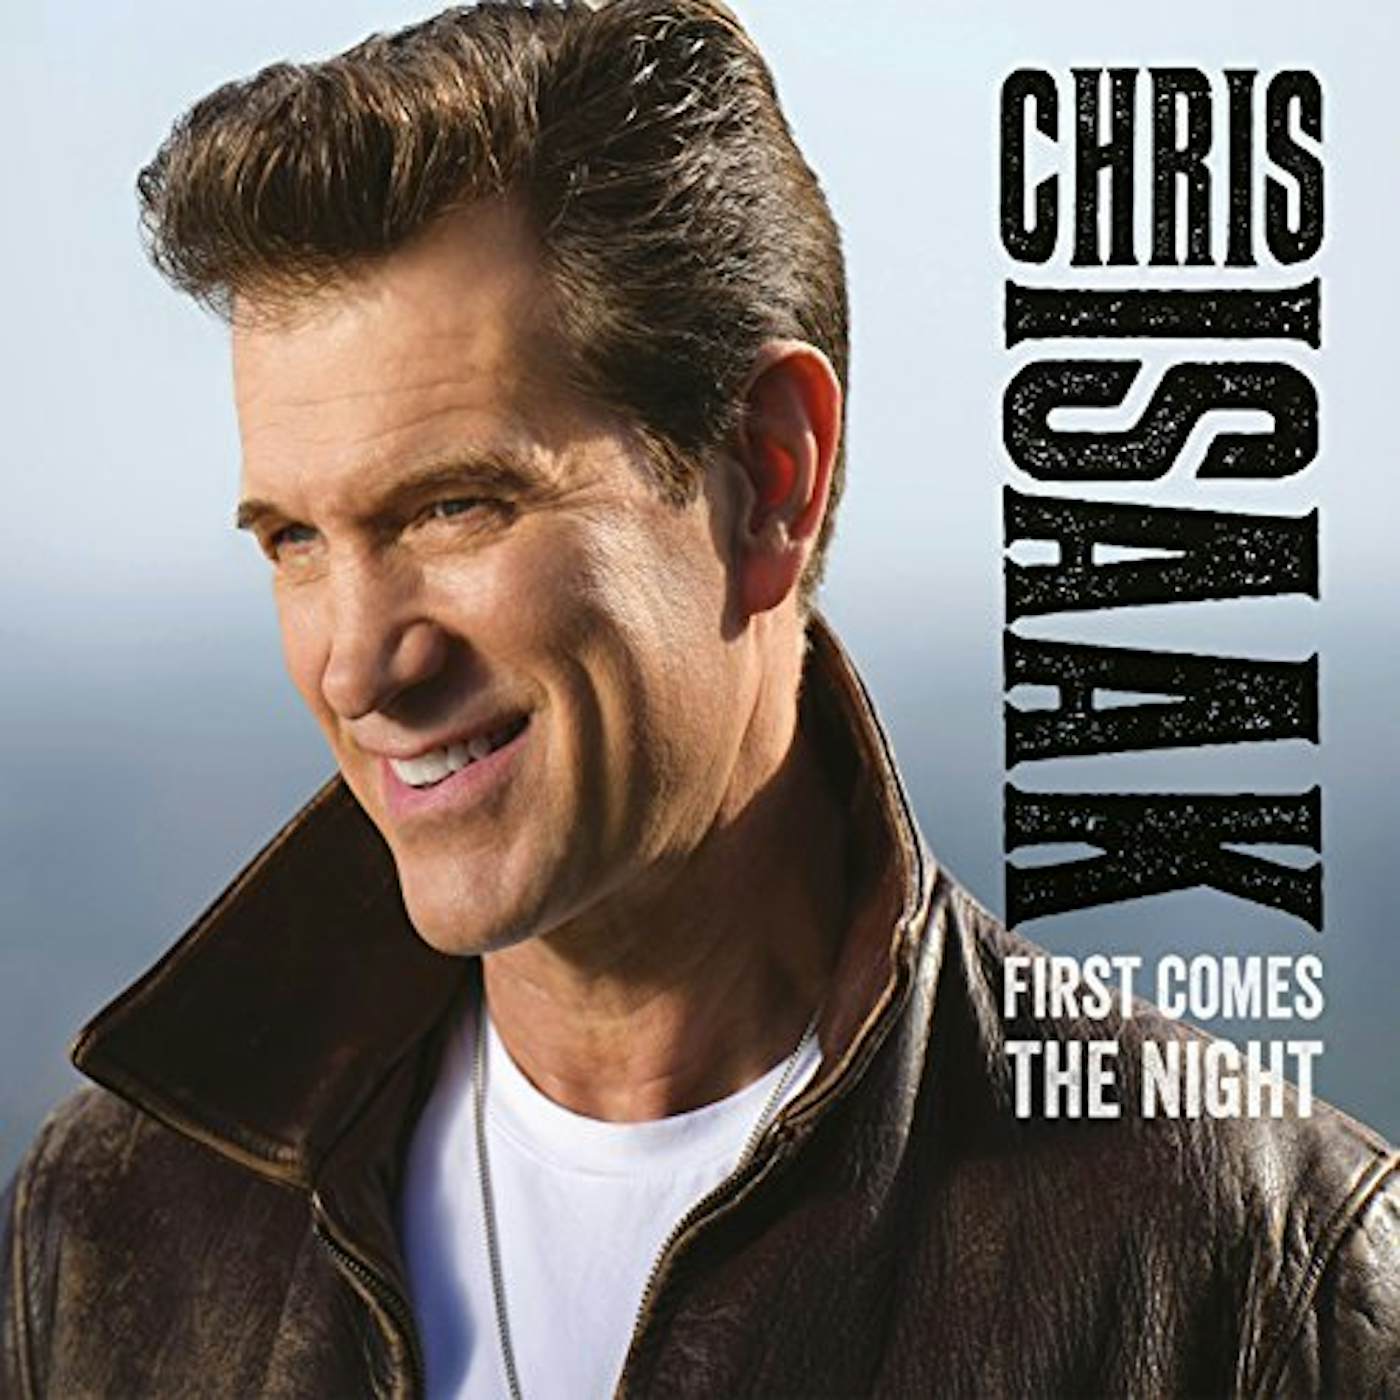 Chris Isaak FIRST COMES THE NIGHT (UK EDITION) Vinyl Record